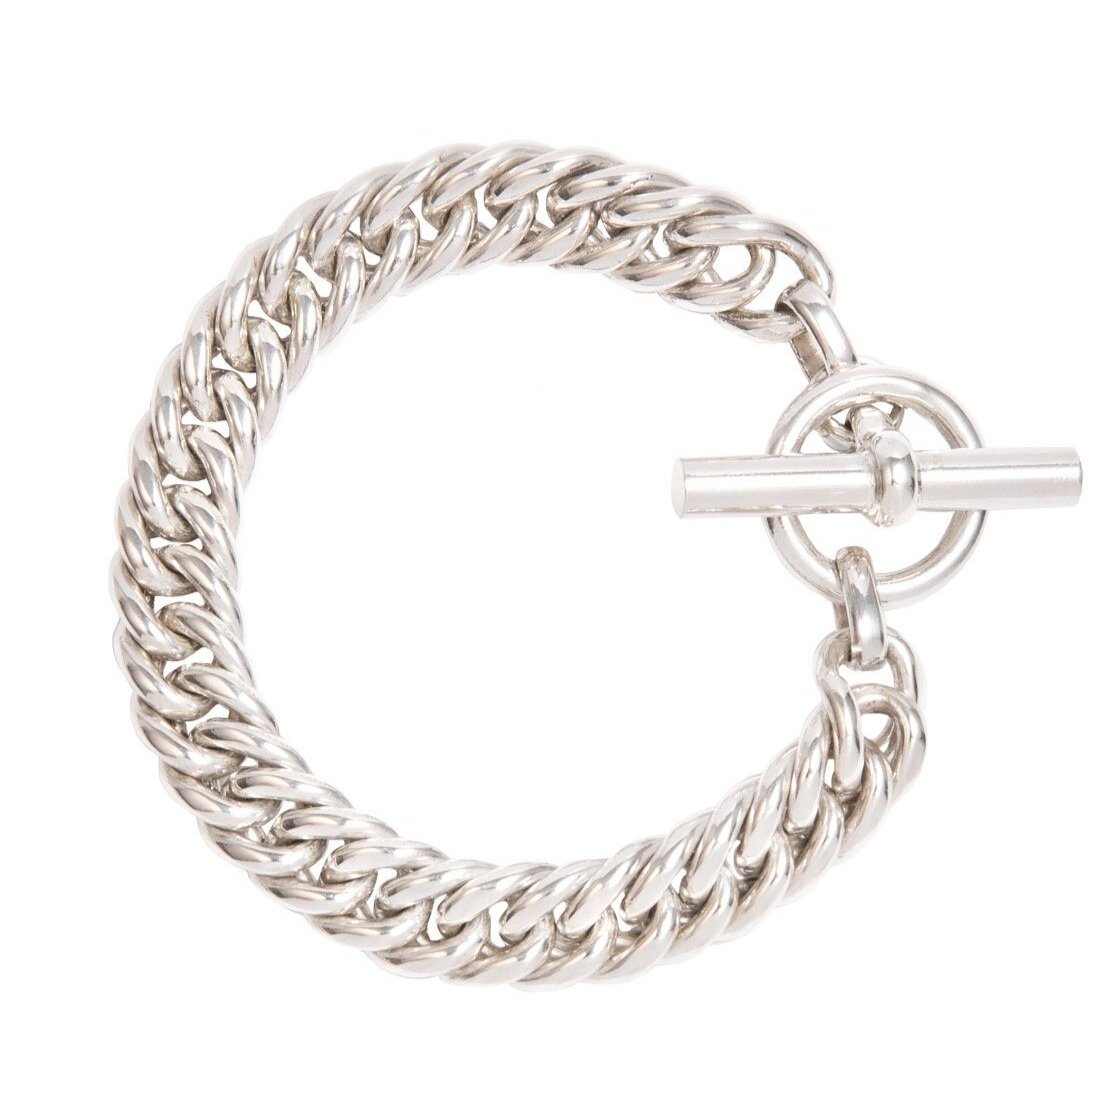 Small Silver Curb Link Bracelet